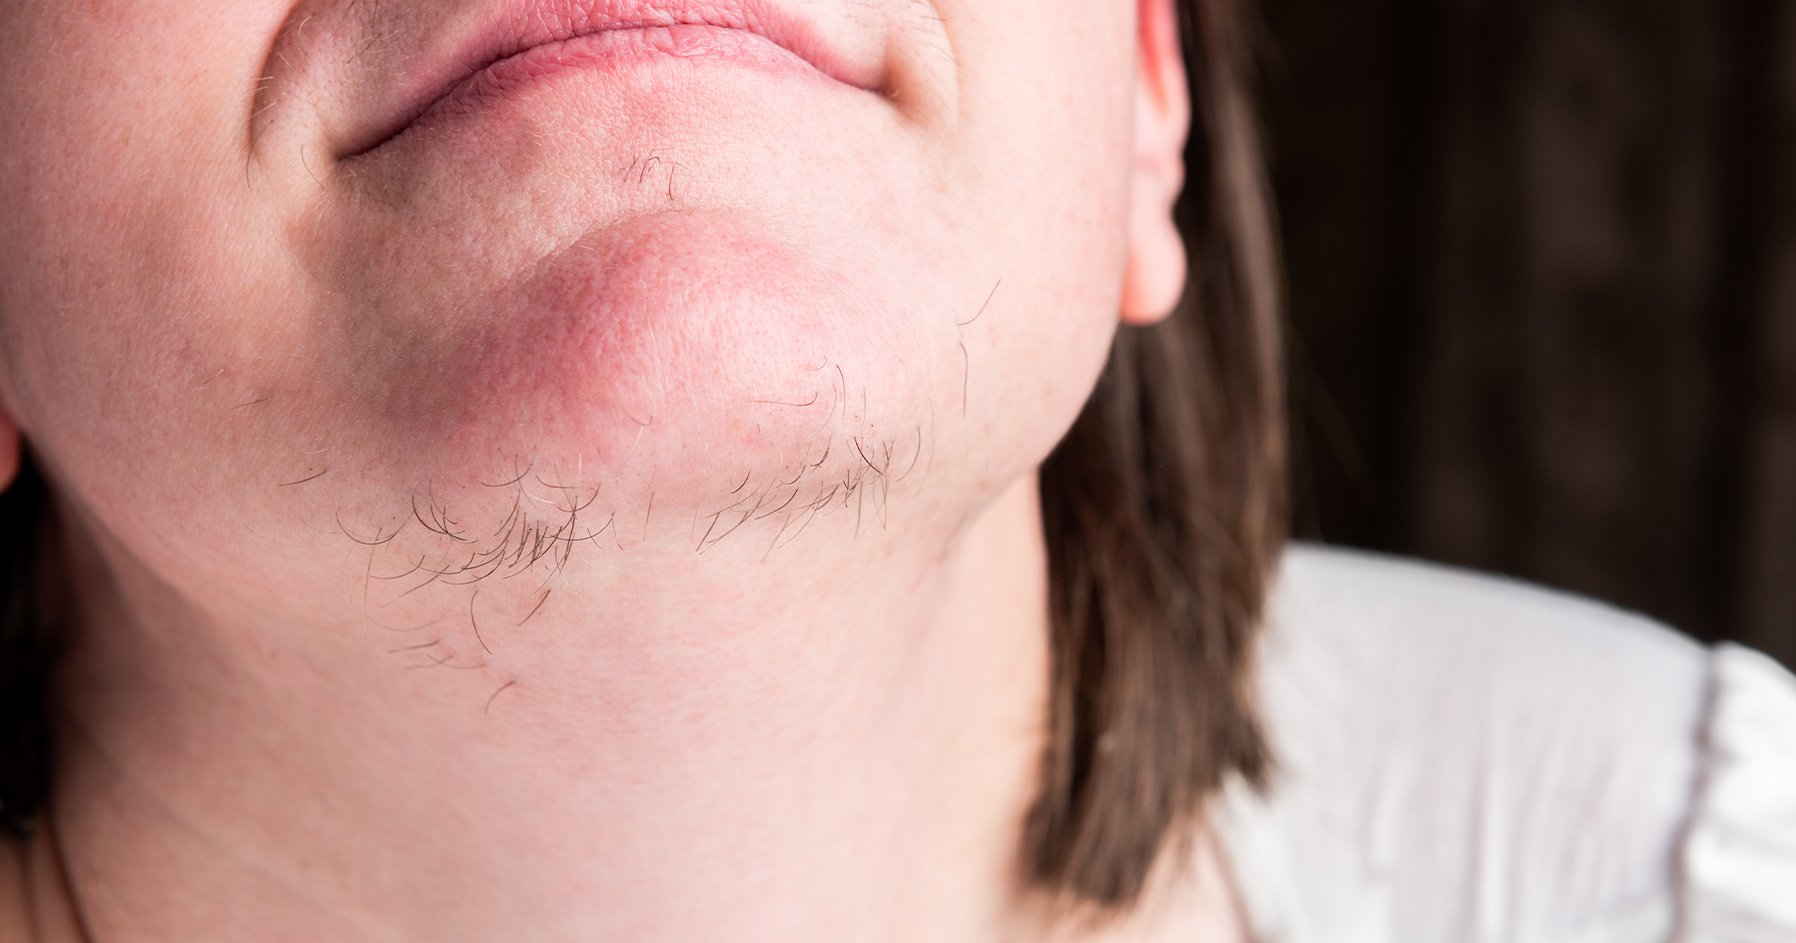 Facial hair in women: Let's bust common myths